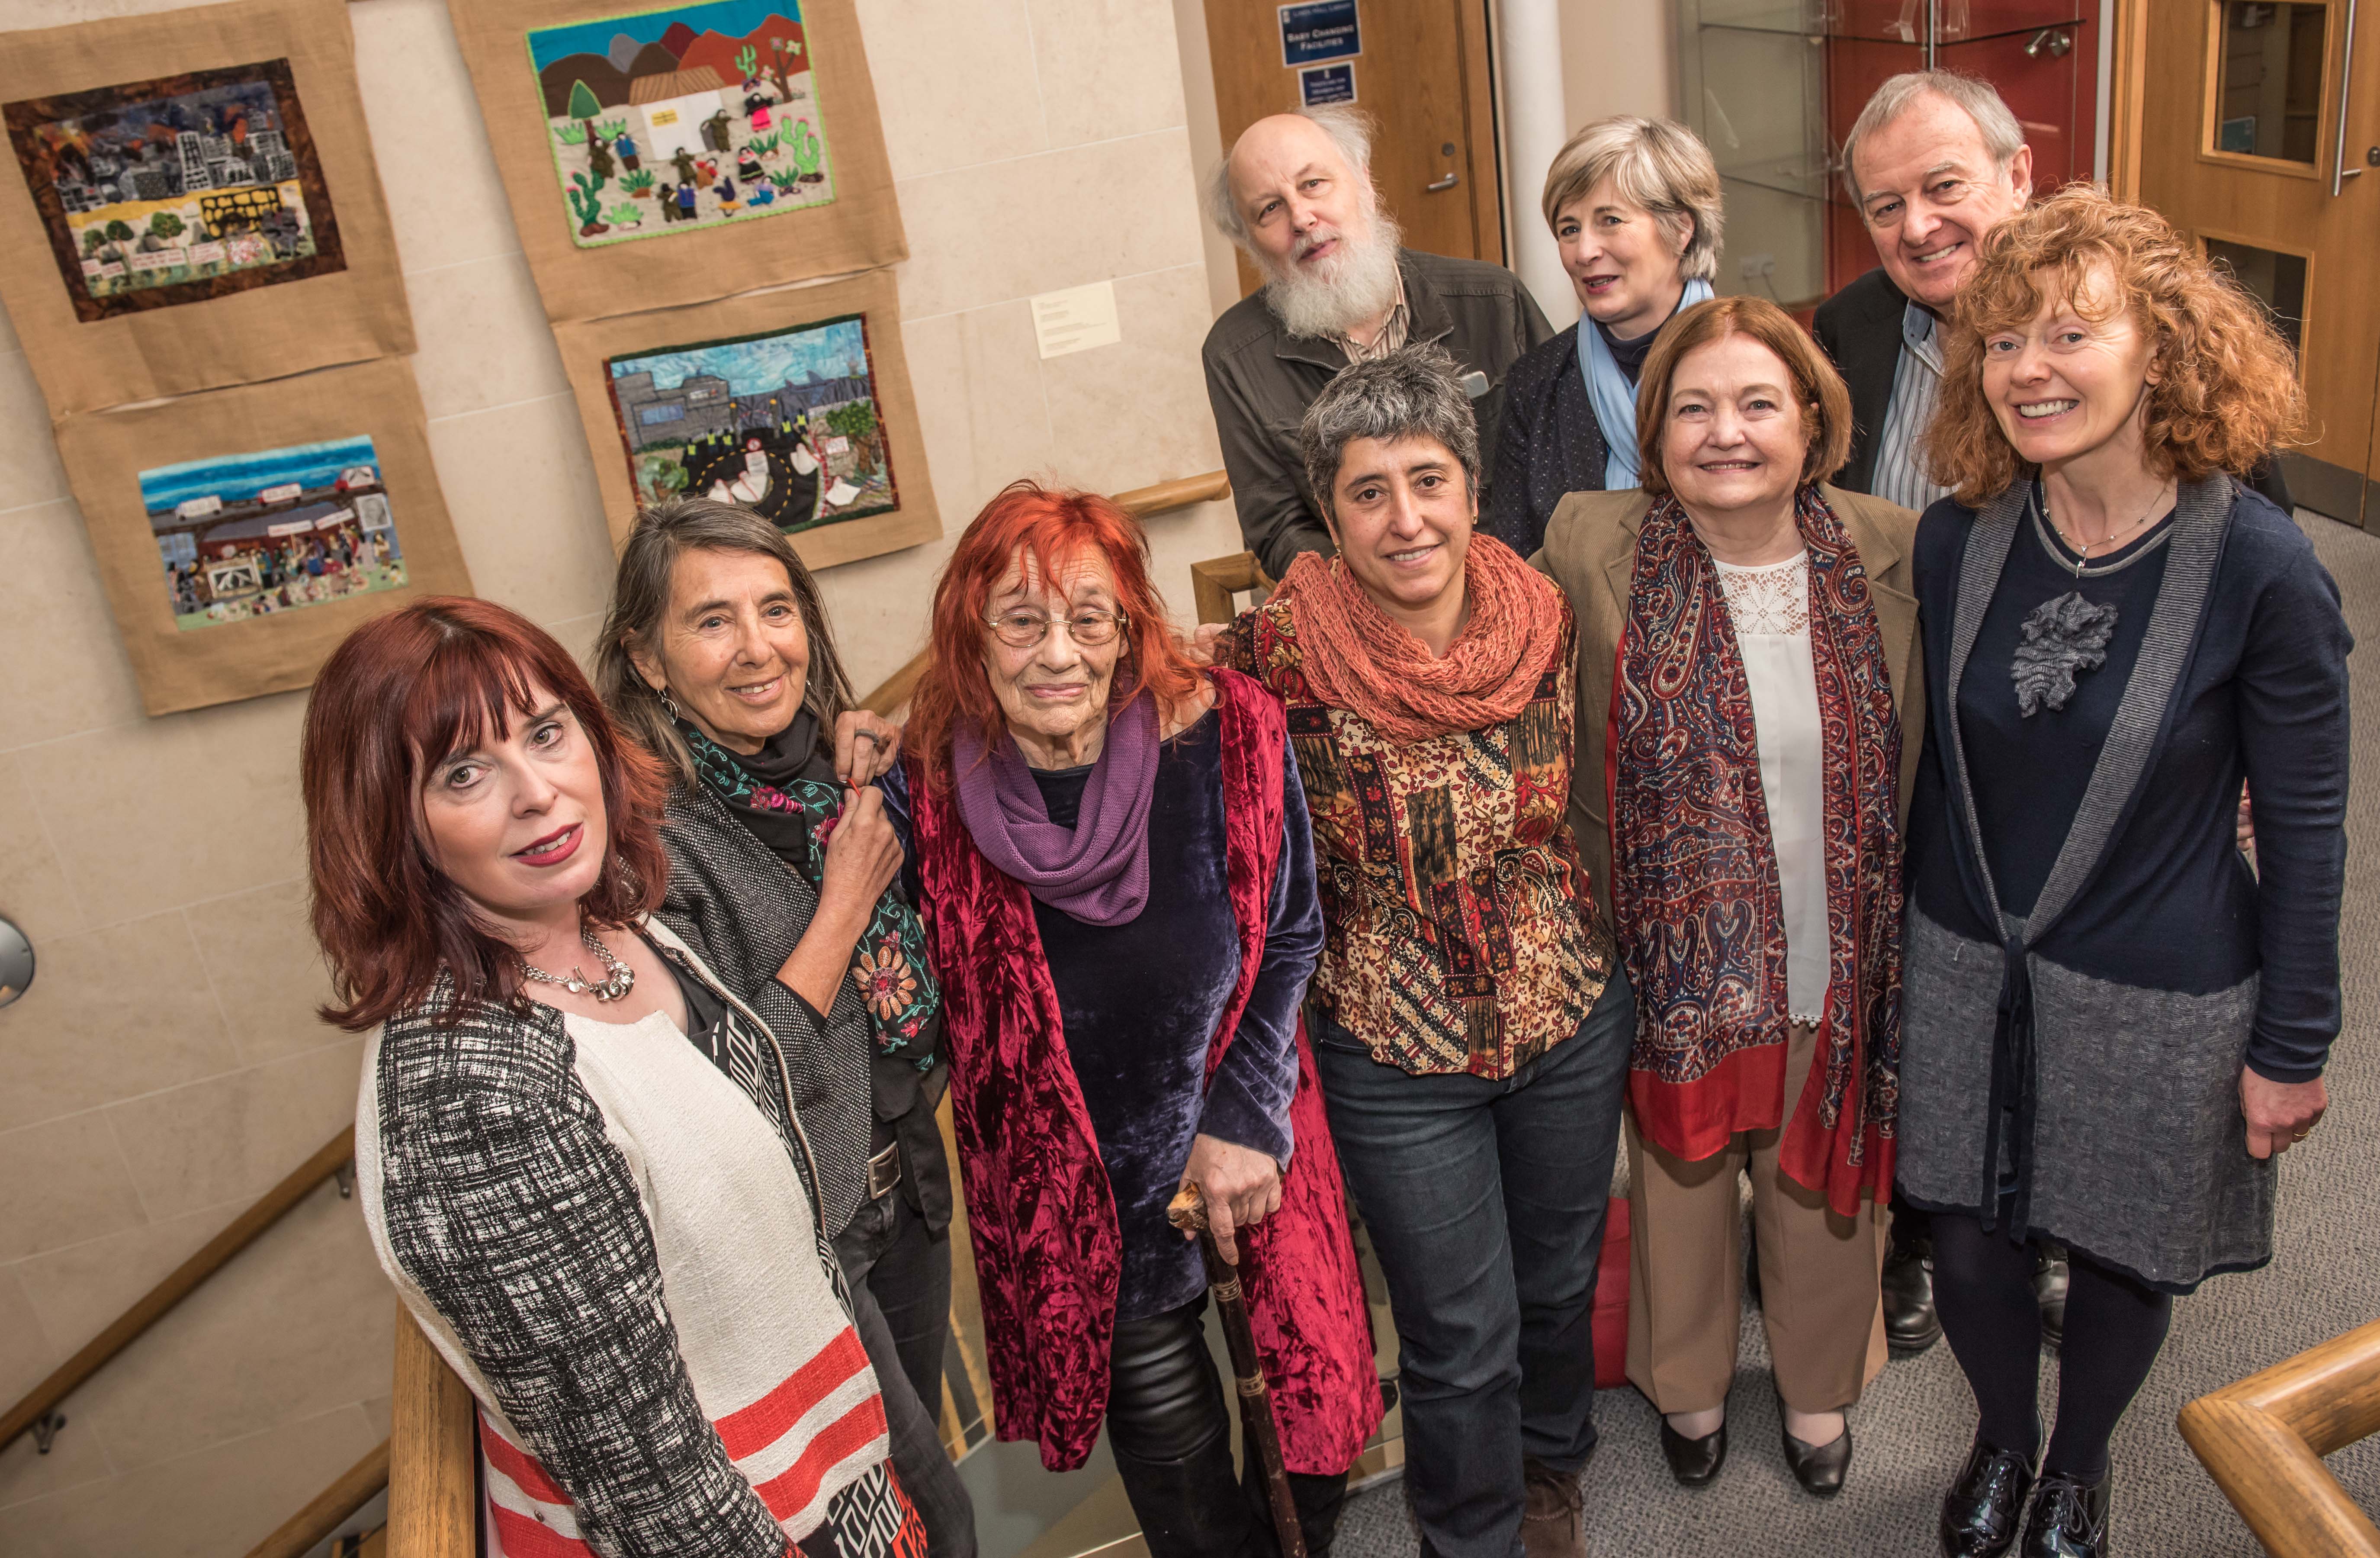 The exhibition team with Margaretta D’Arcy, Peace Activist (3rd from left); Maired Maguire, Nobel Peace Laureate (2nd from right); and Phil Scraton, Emeritus Professor of Criminology, QUB (back row, right), at the launch. (Photo: Linenhall Library)